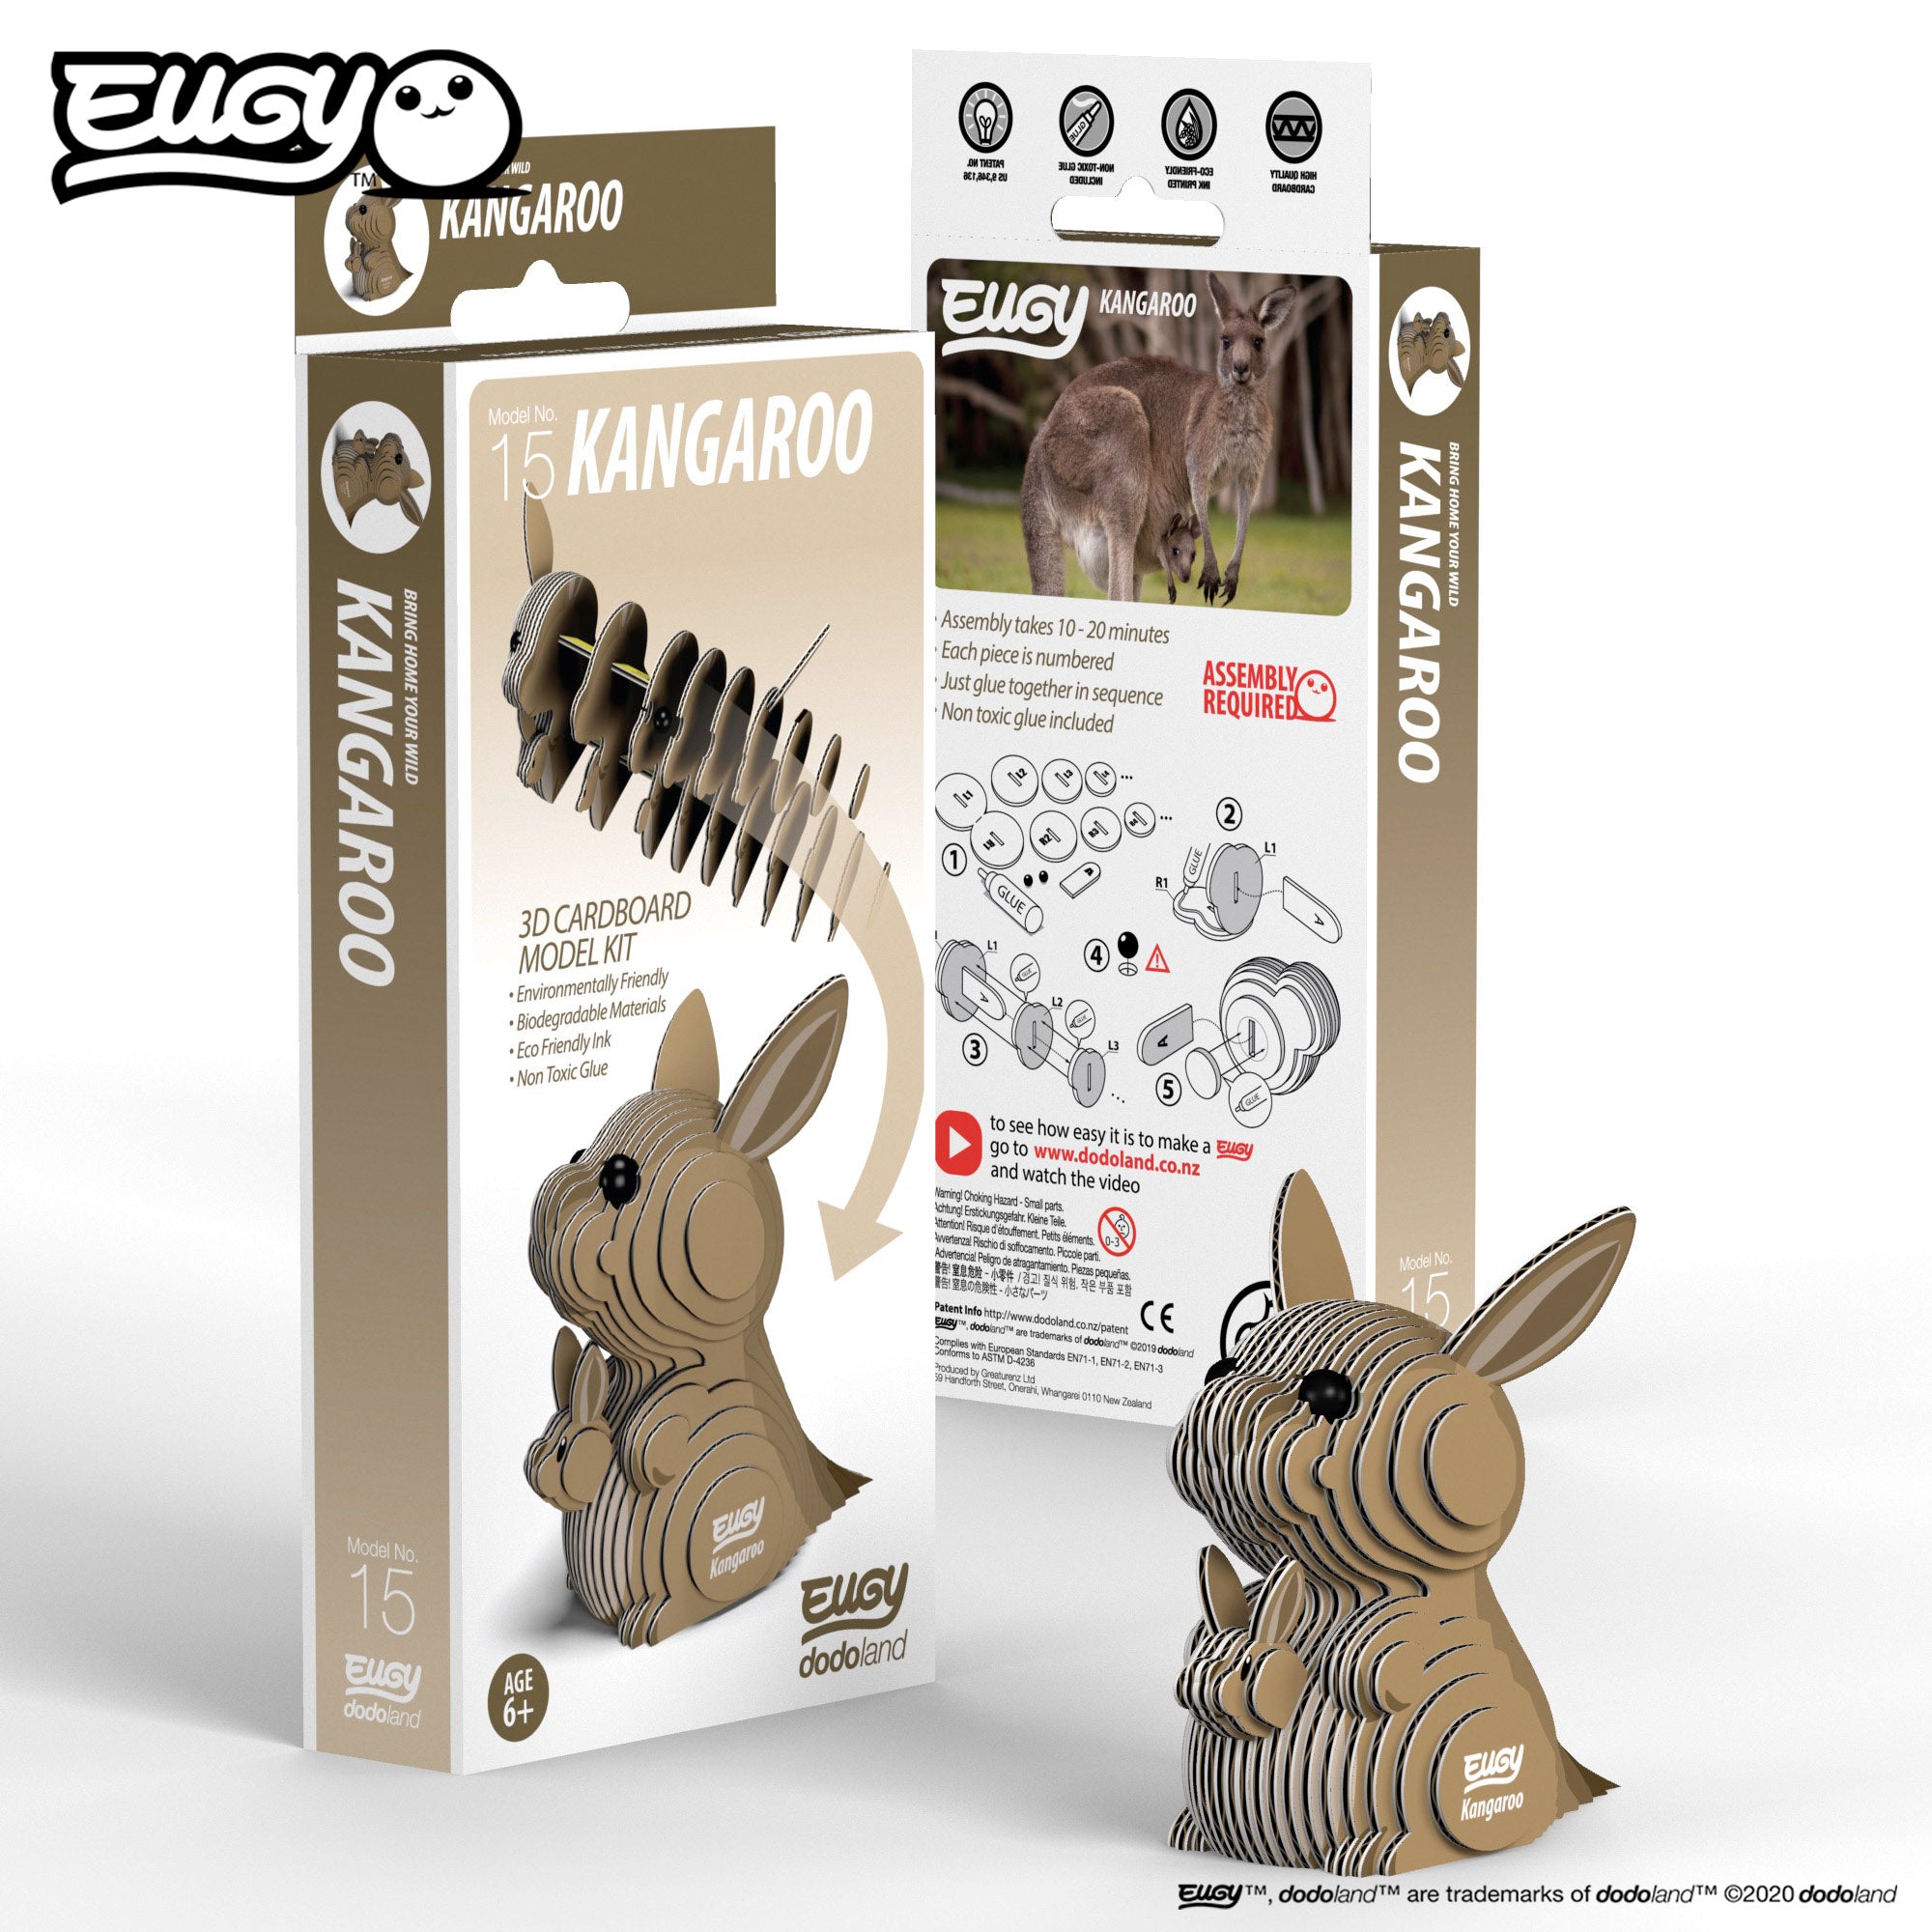 Image of an EUGY Kangaroo & Joey, looking left  in front two EUGY Kangaroo Boxes, 1 showing the front cover and the other showing the rear of the box, against a white background